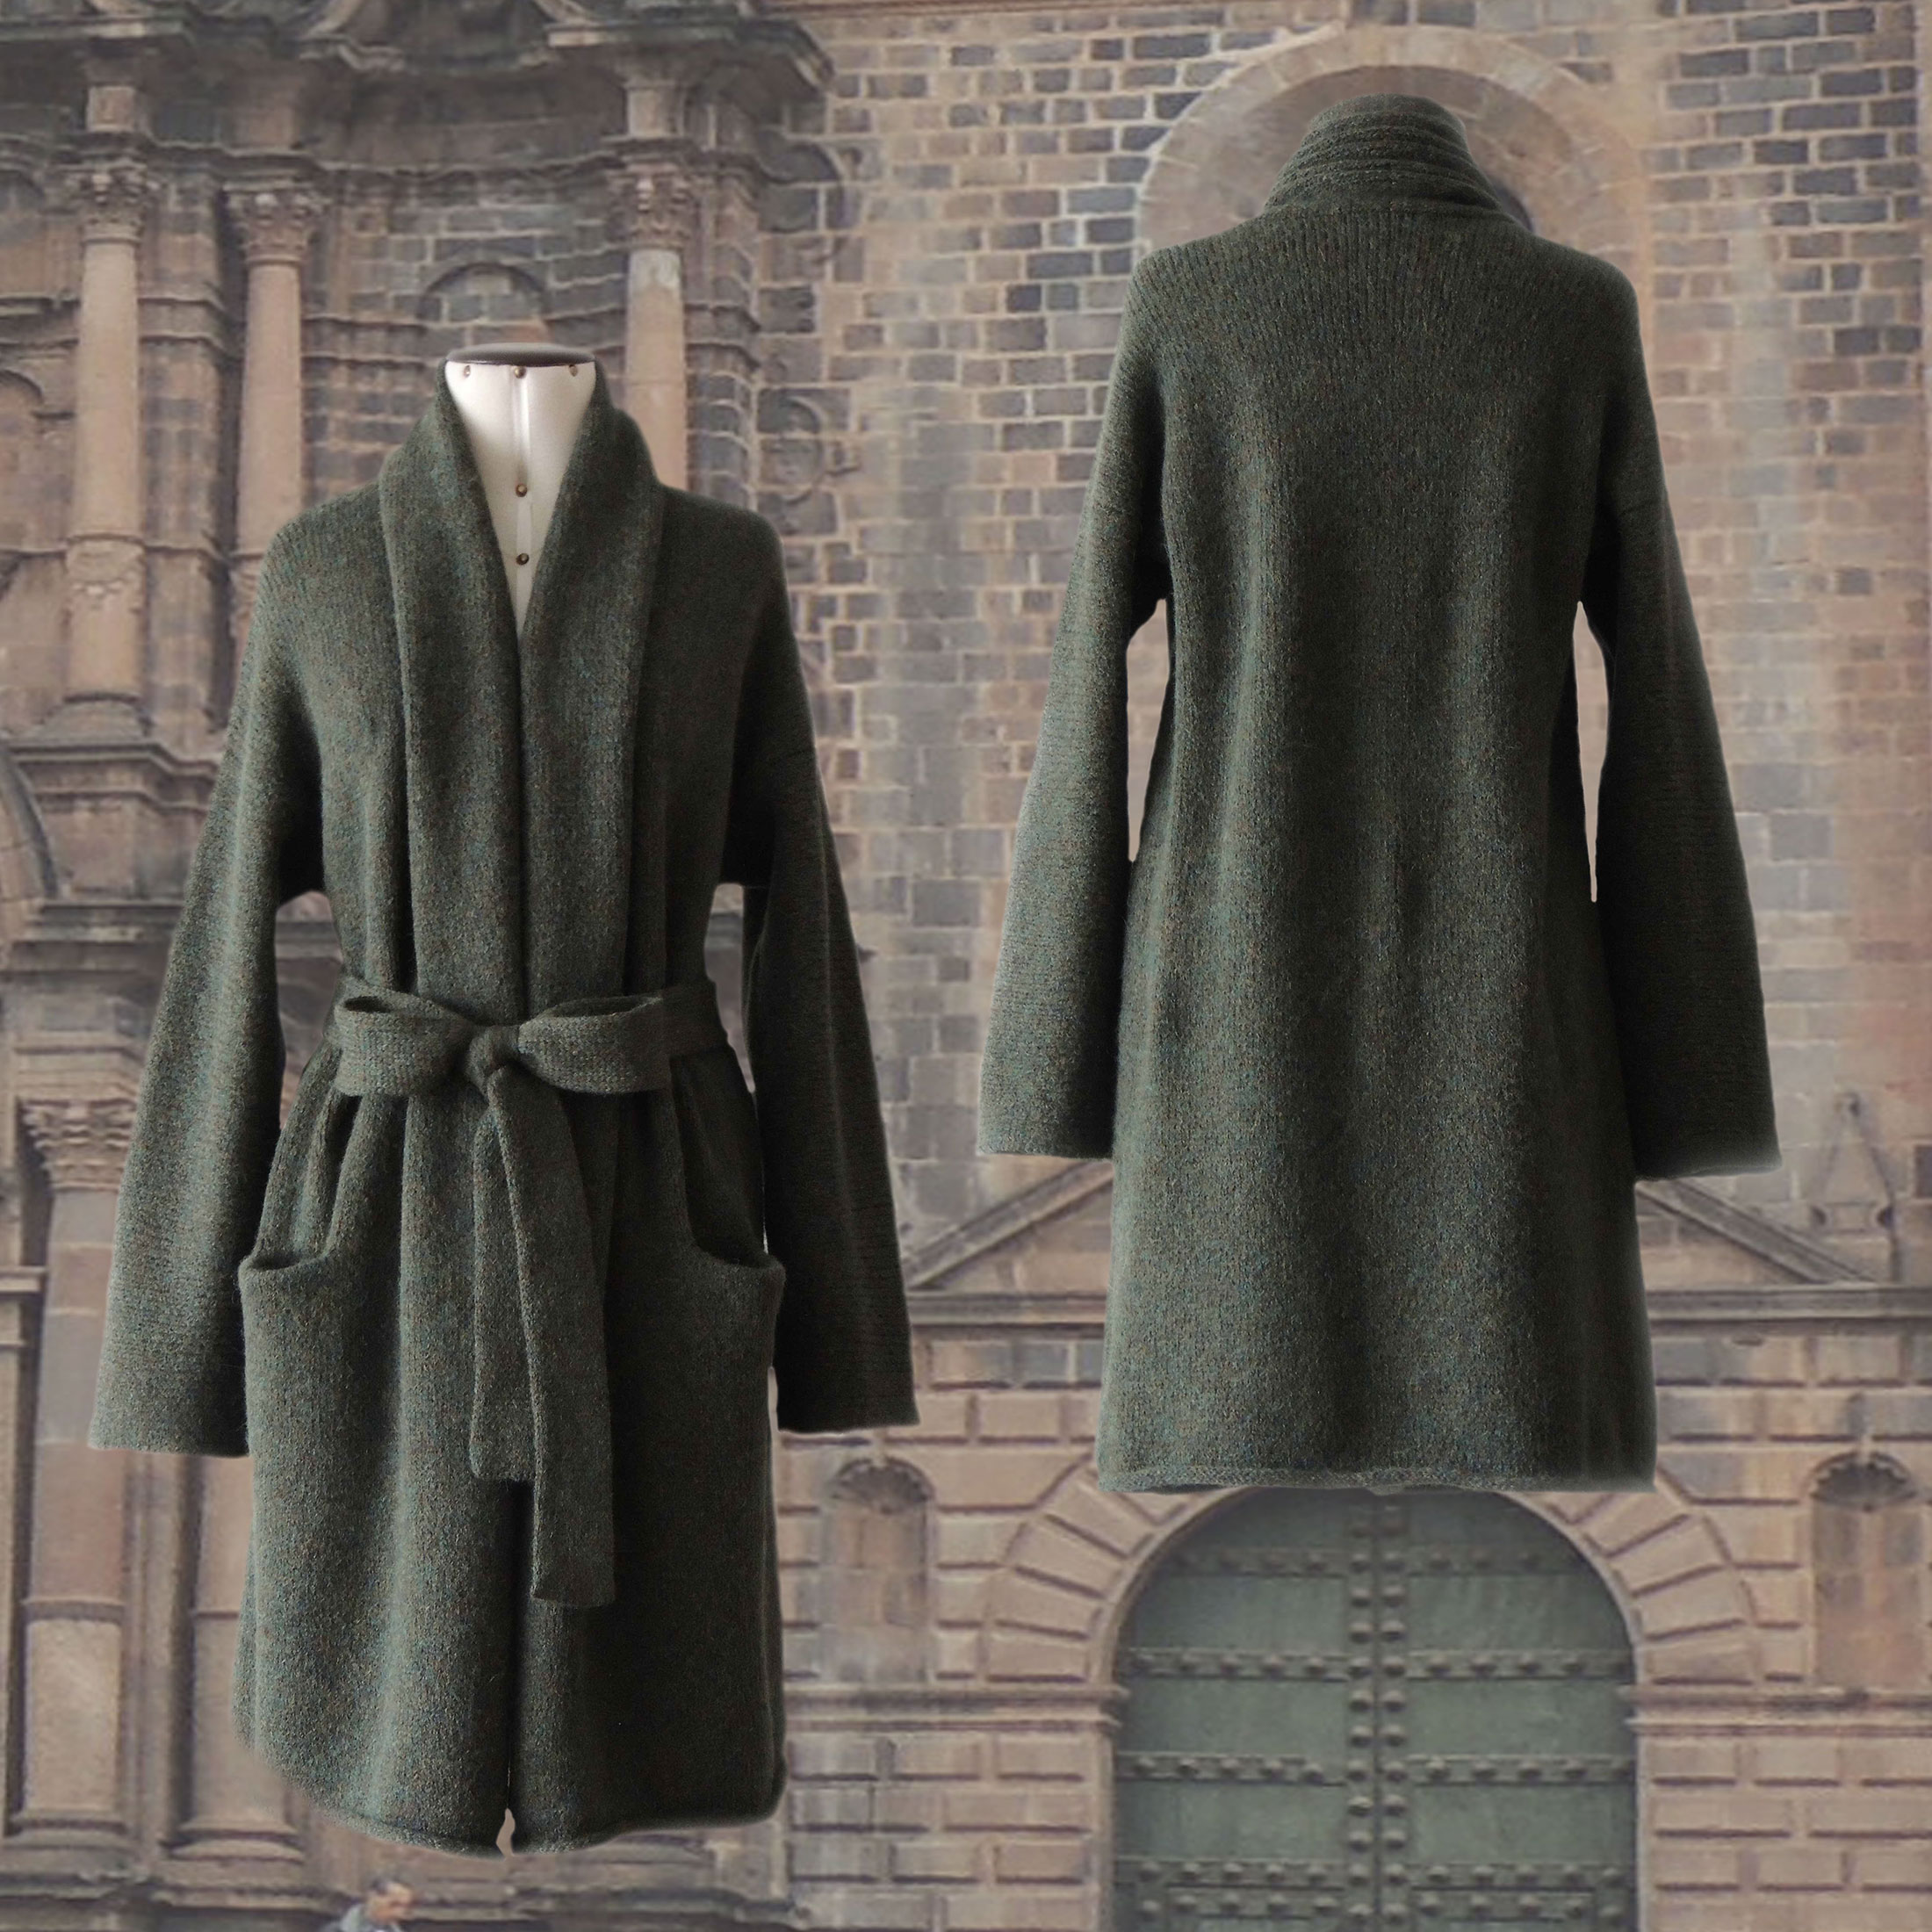 PFL KNITWEAR Capote Coat a limited edition blend color cardigan 93% alpaca, that exudes luxury and comfort inclusive belt